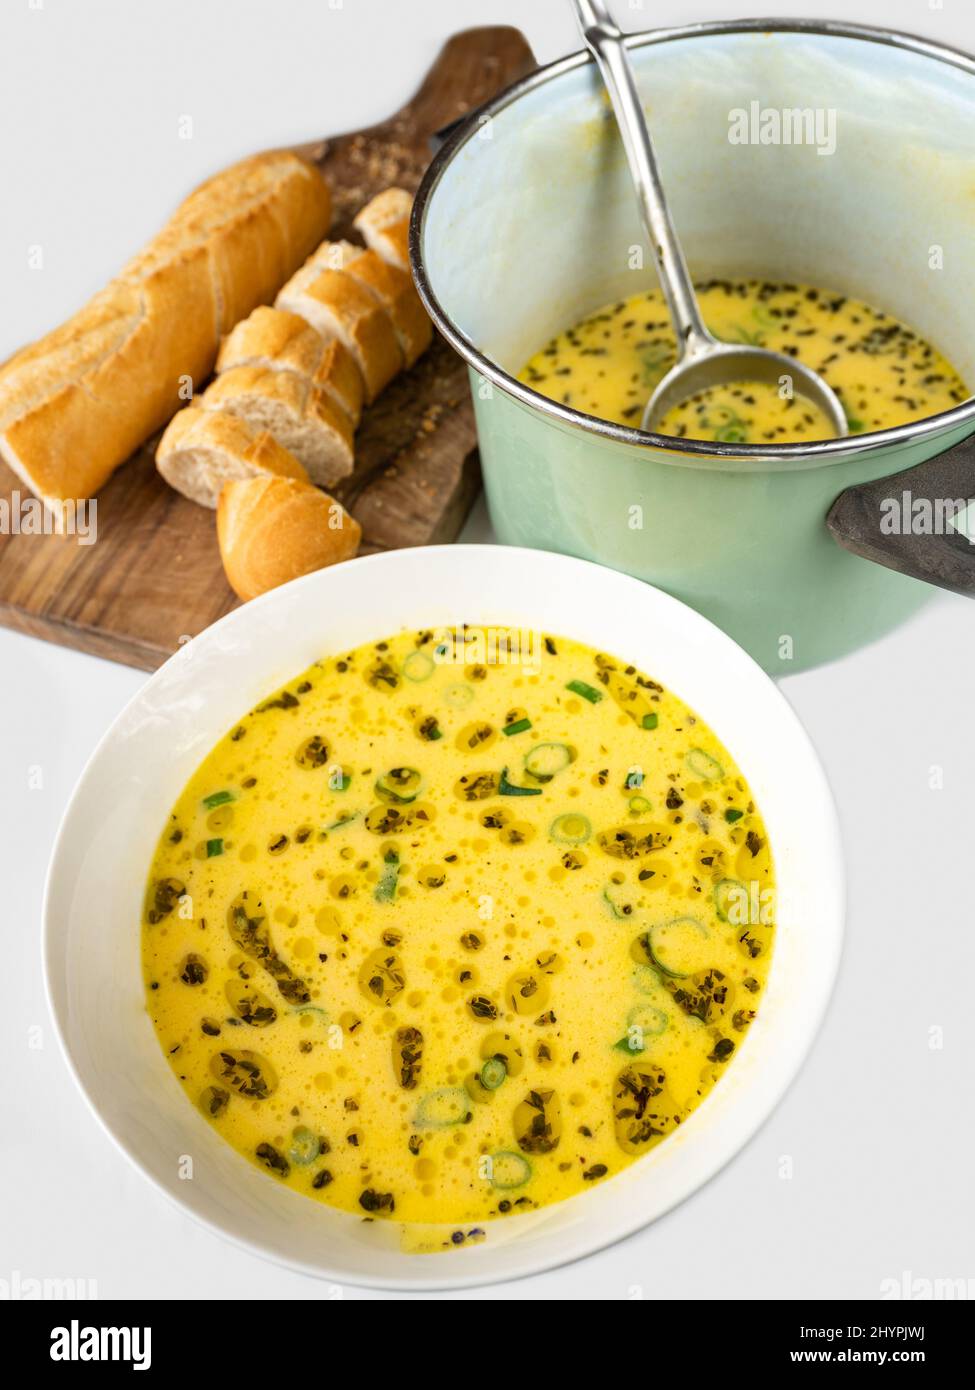 Cheese soup with oregano herb and green onion shoot in white plate and in green pot, sliced bread, all on white background. Stock Photo